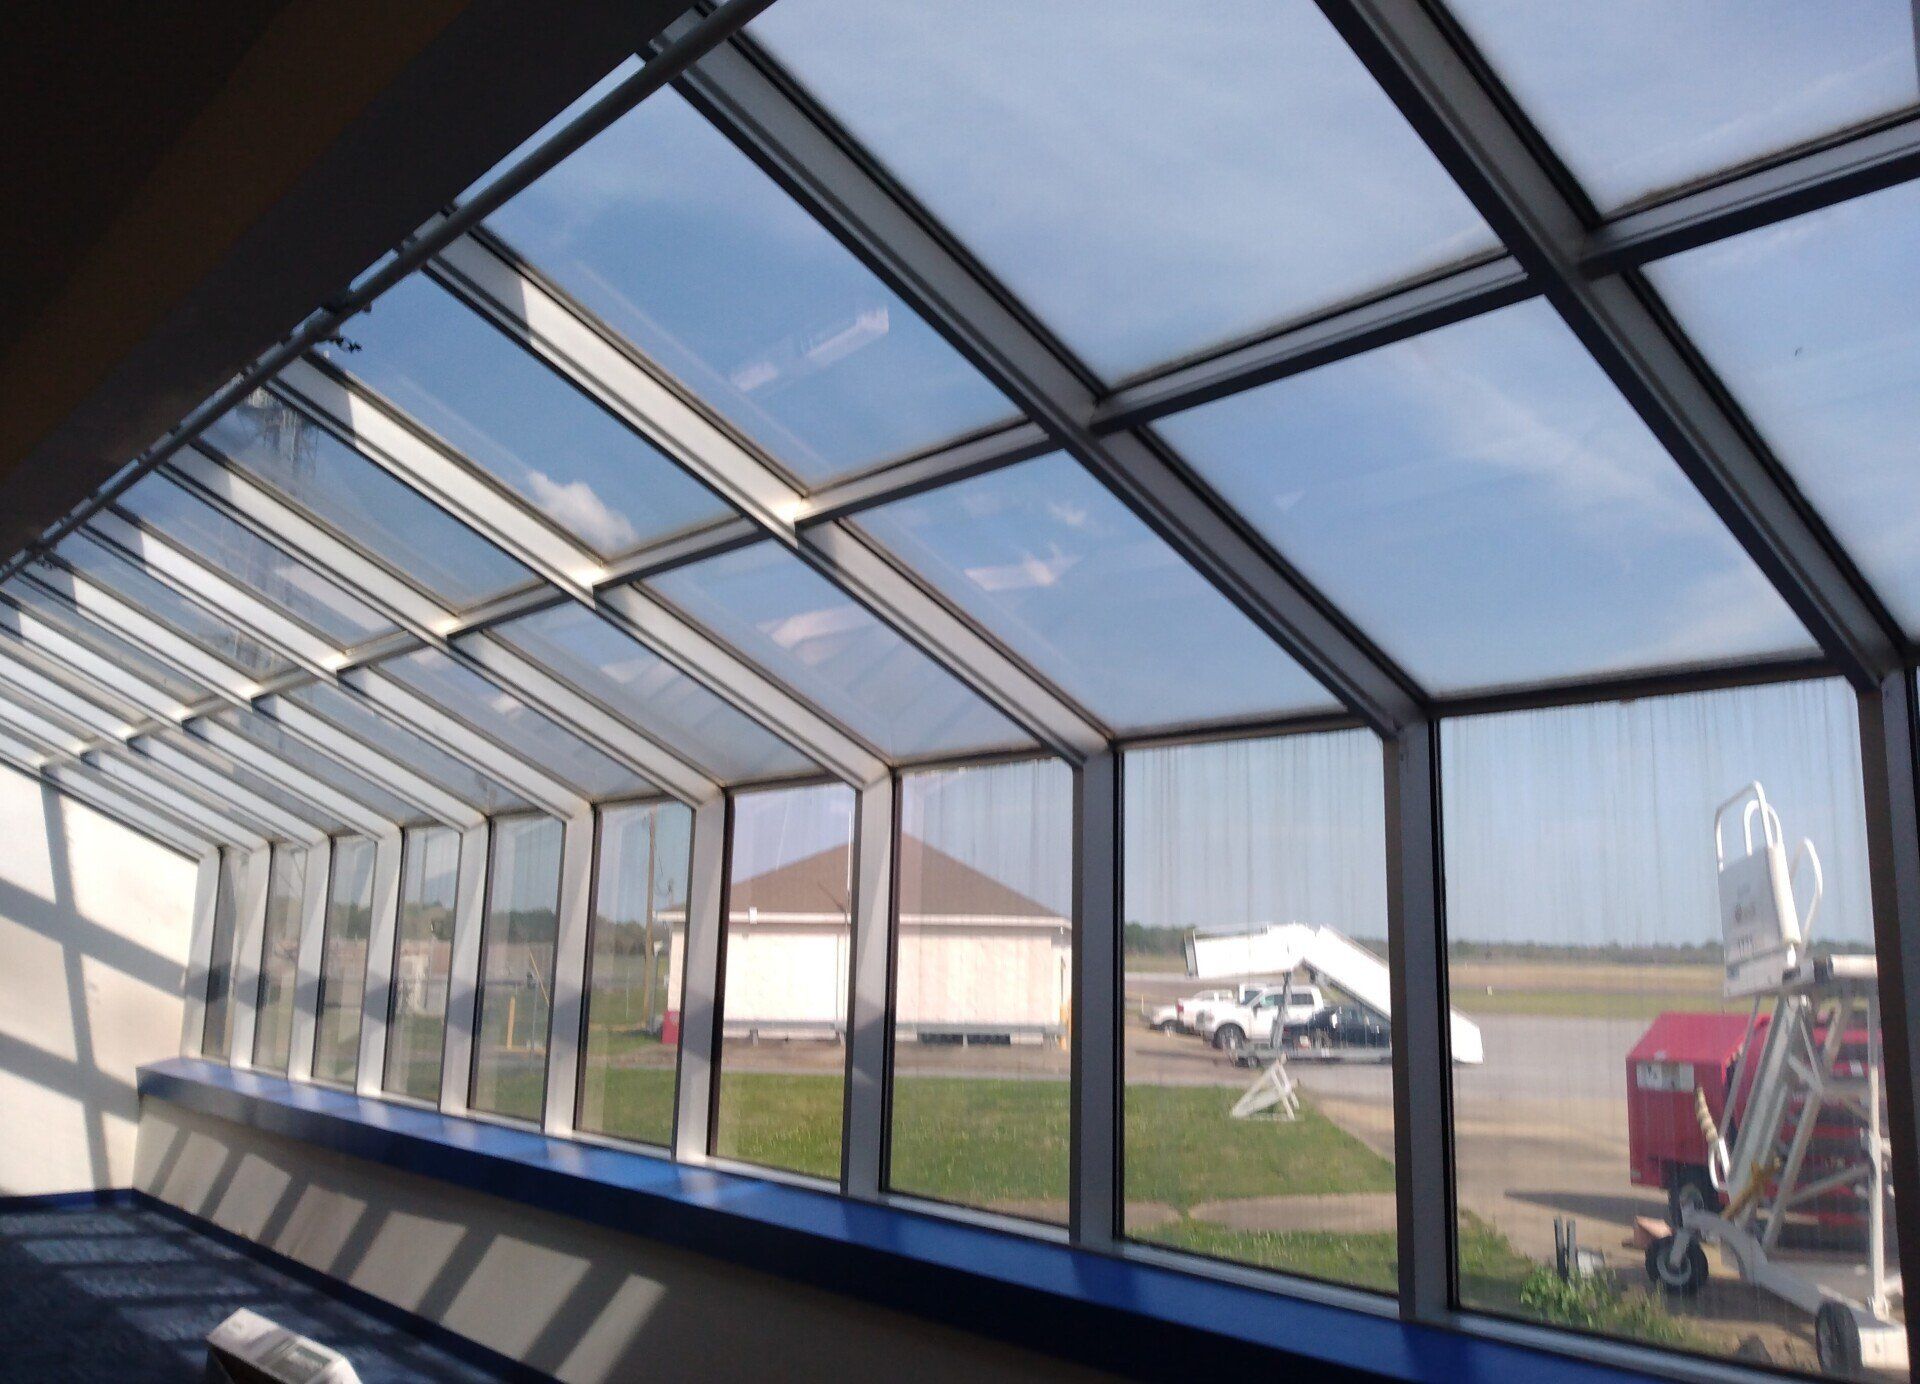 window renovation adds energy efficiency - Industry-Leading performance achieved in record 91% Bright Glare & Heat Blocked from Airport windows. SPF Tinted in 2022. Montgomery, AL